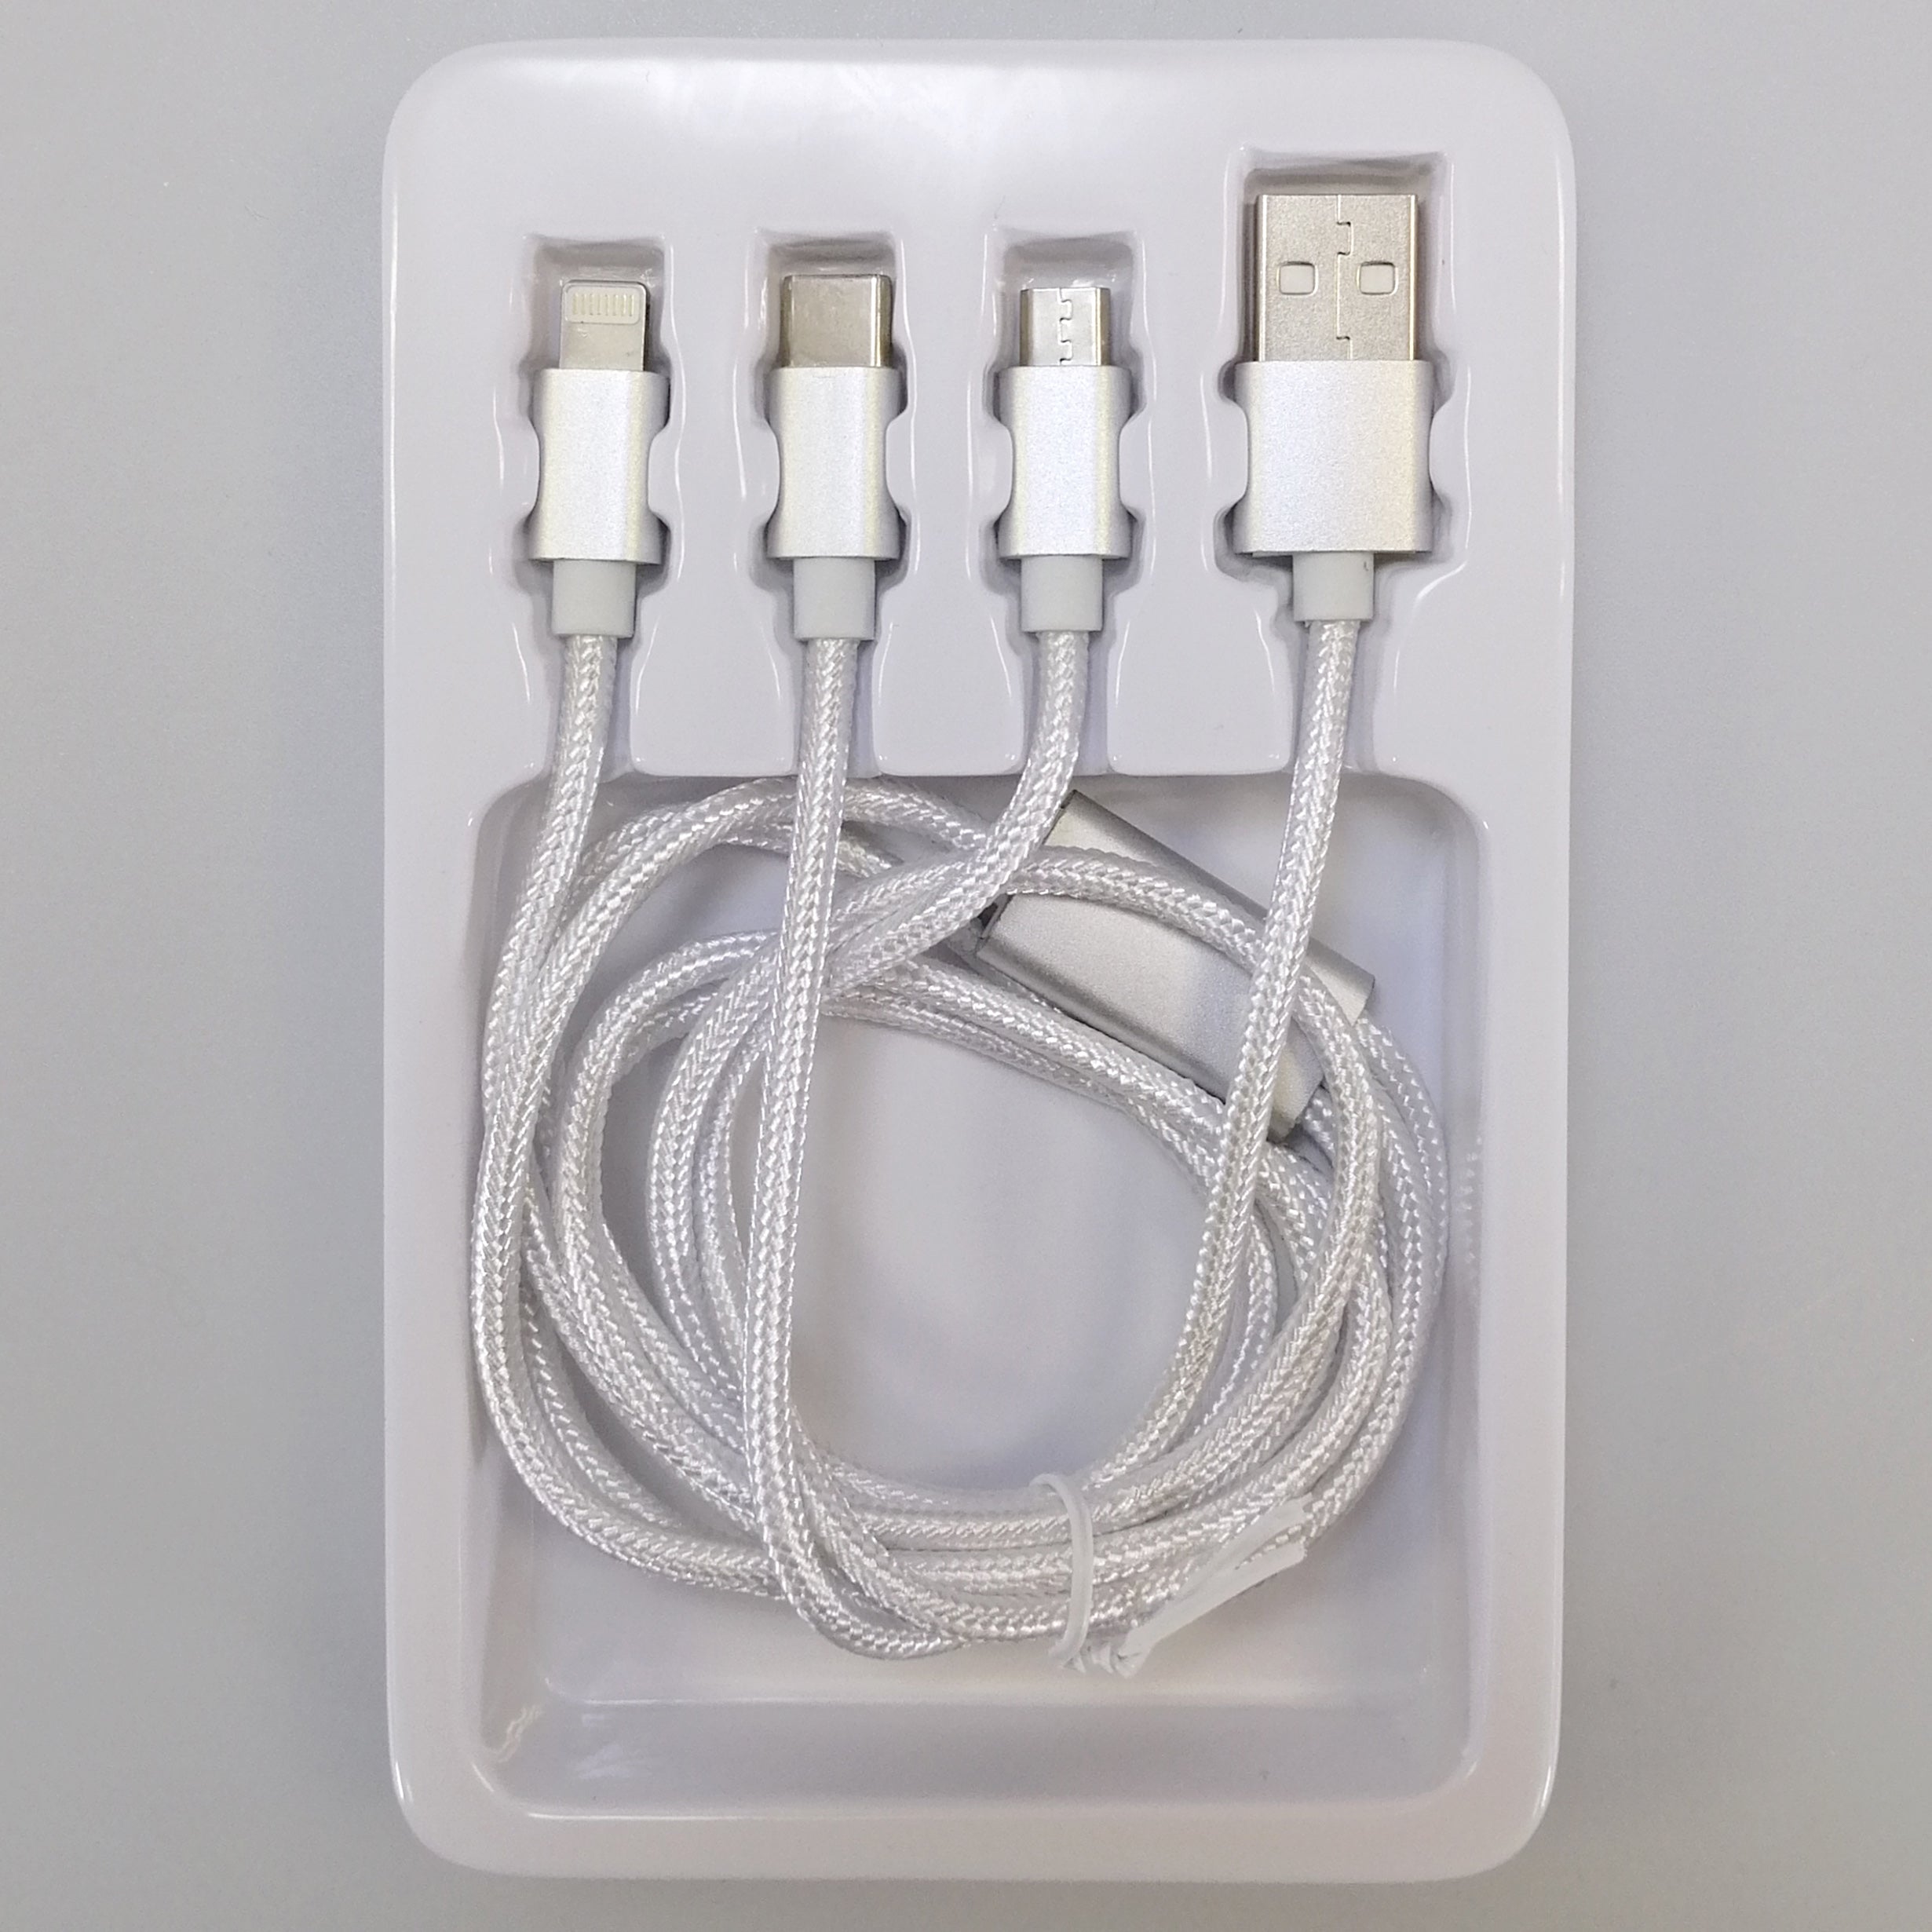 3in1 Multicord USB Charging Cable - Assorted Colours